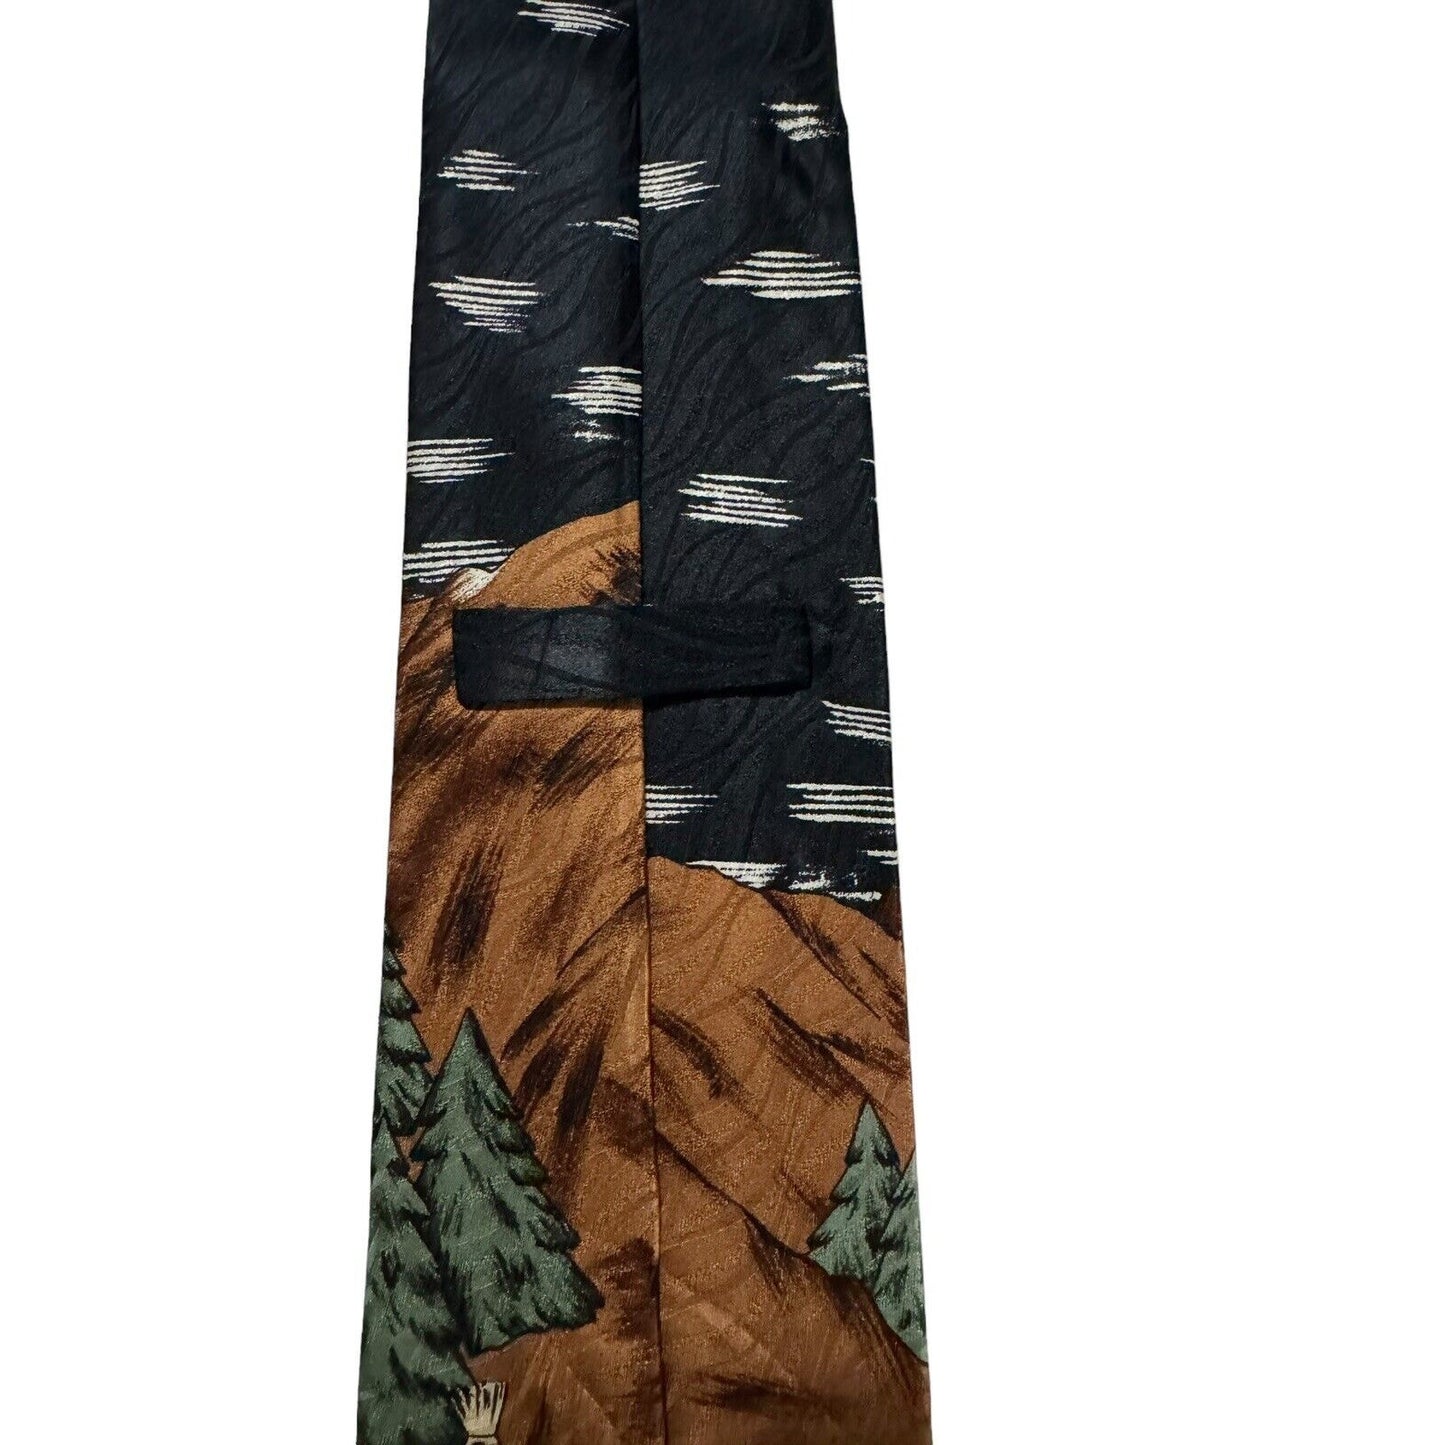 Vintage Native American Indians Trees Mountain Novelty Necktie